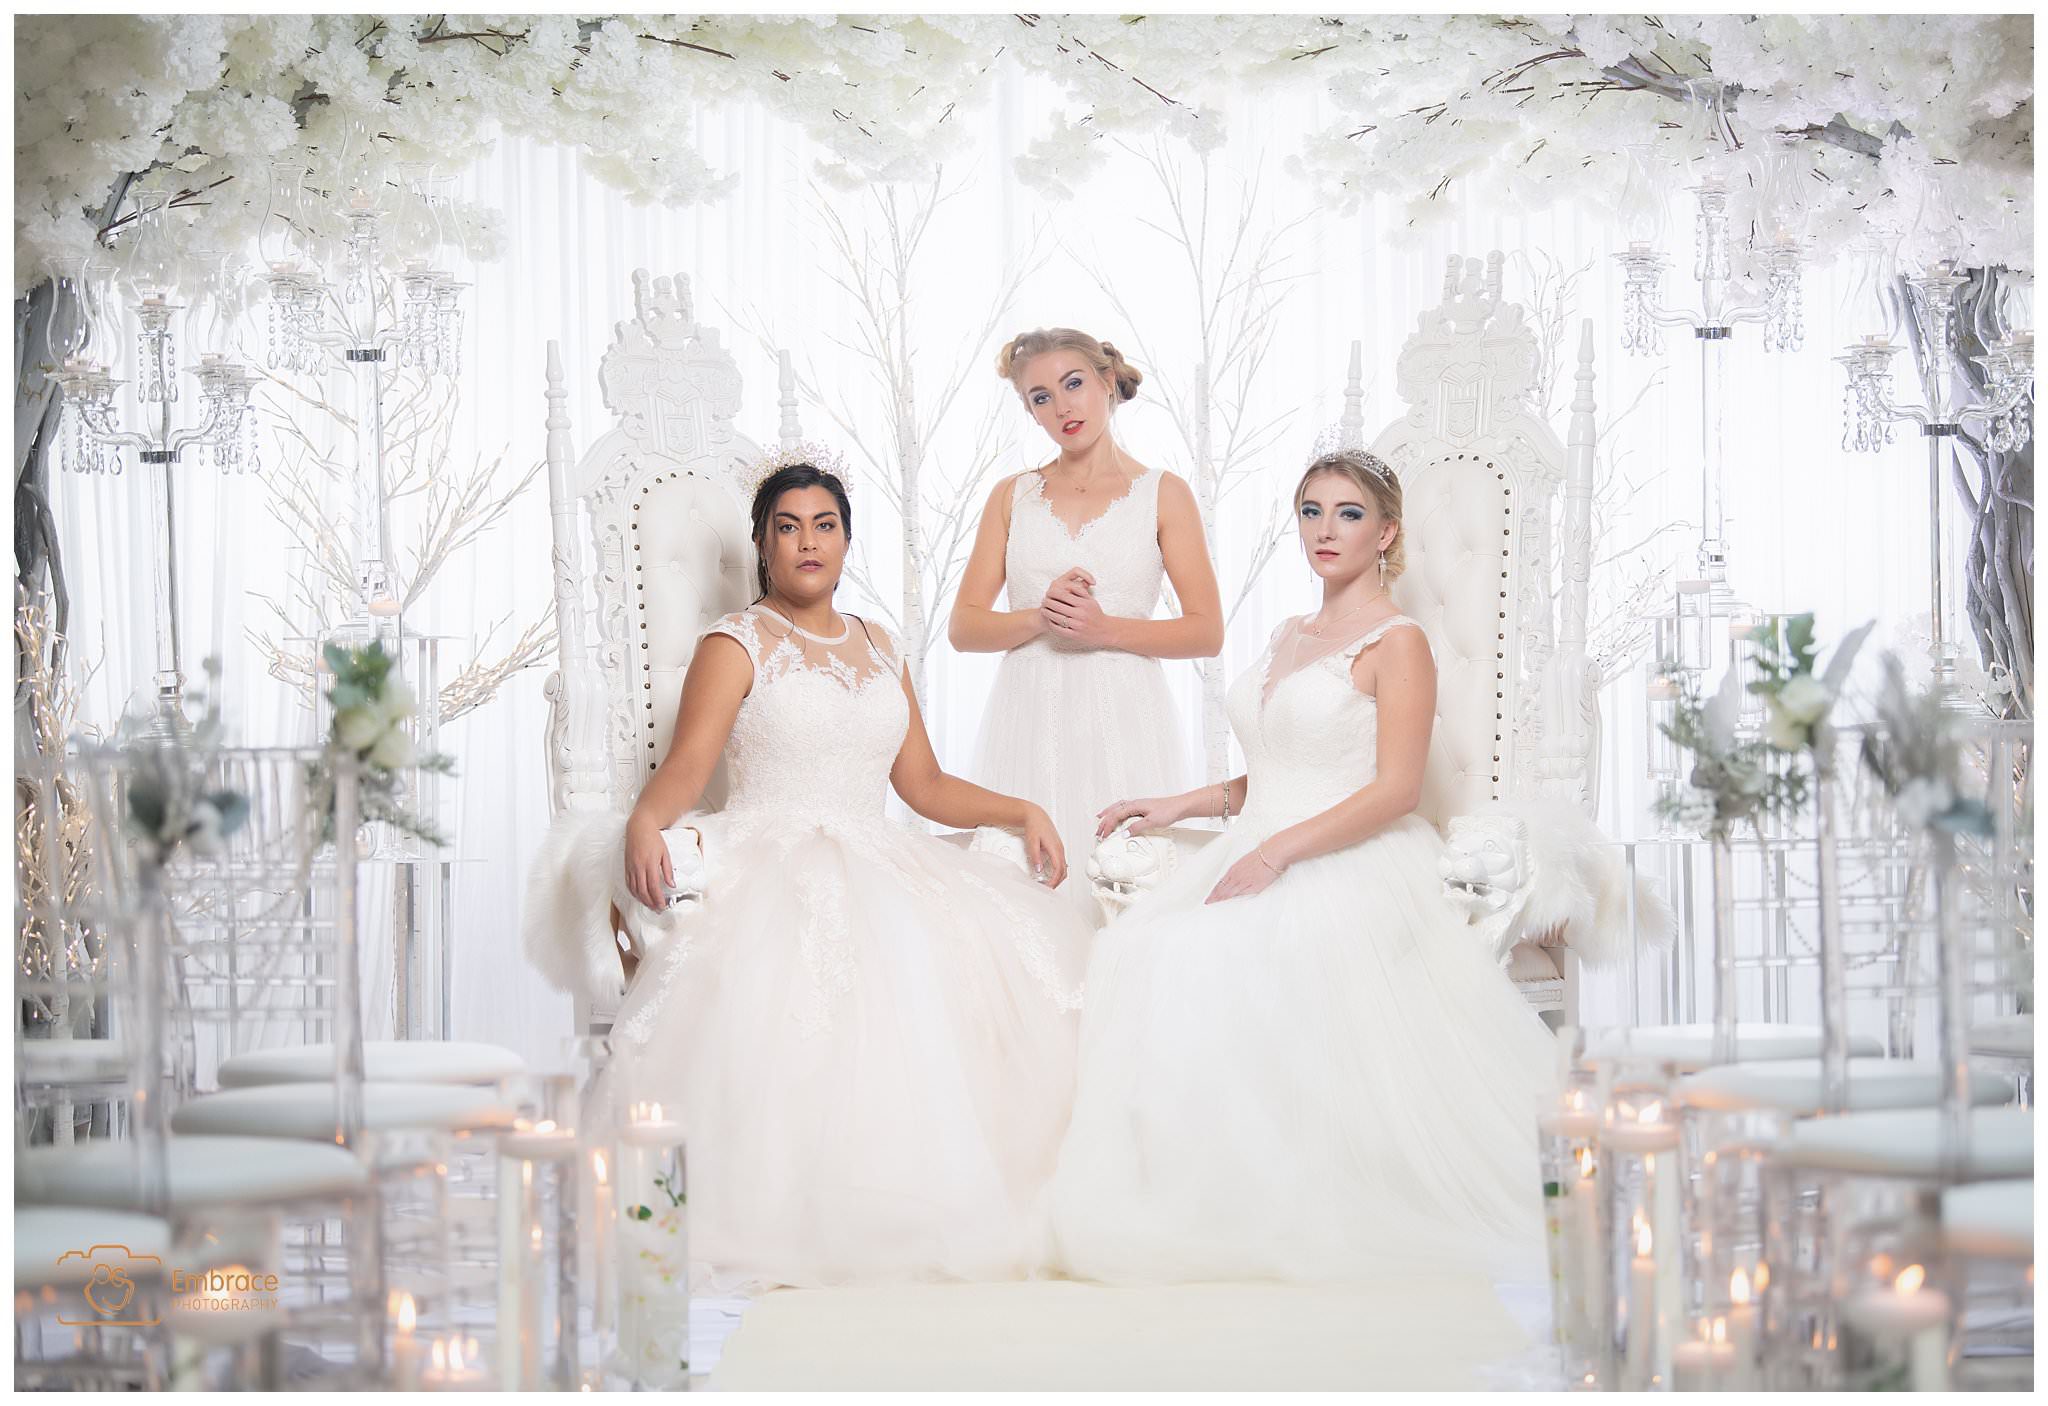 Eloise, Melissa and Laura looking elegant and beautiful in the fairytale wedding set provided by Celebration cars and events.